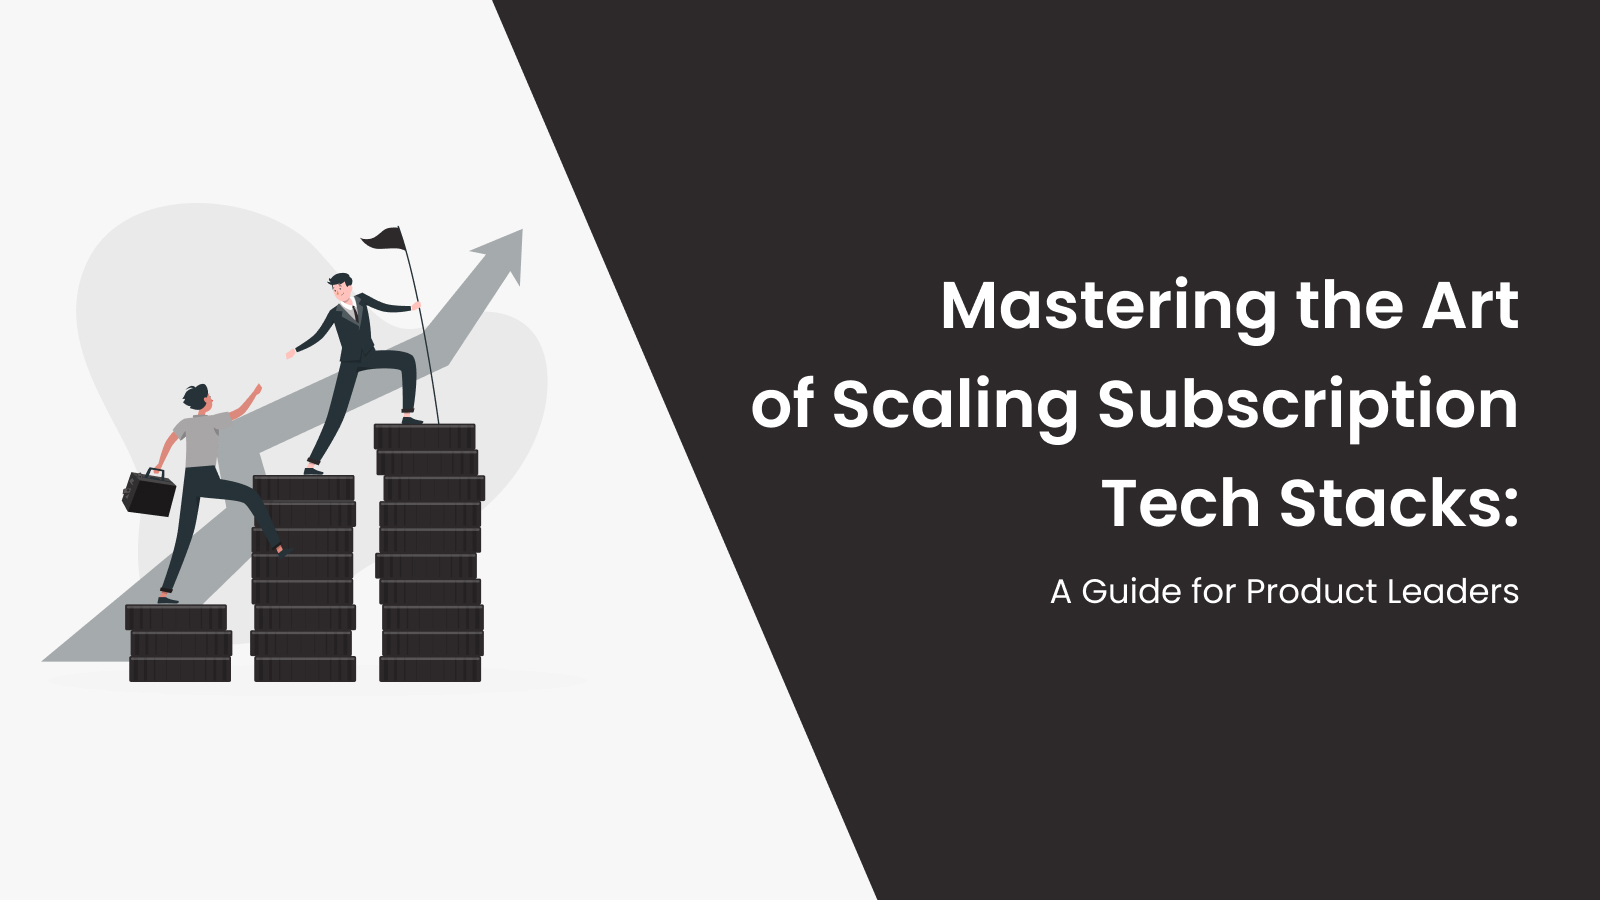 Mastering the Art of Scaling Subscription Tech Stacks: A Guide for Product Leaders